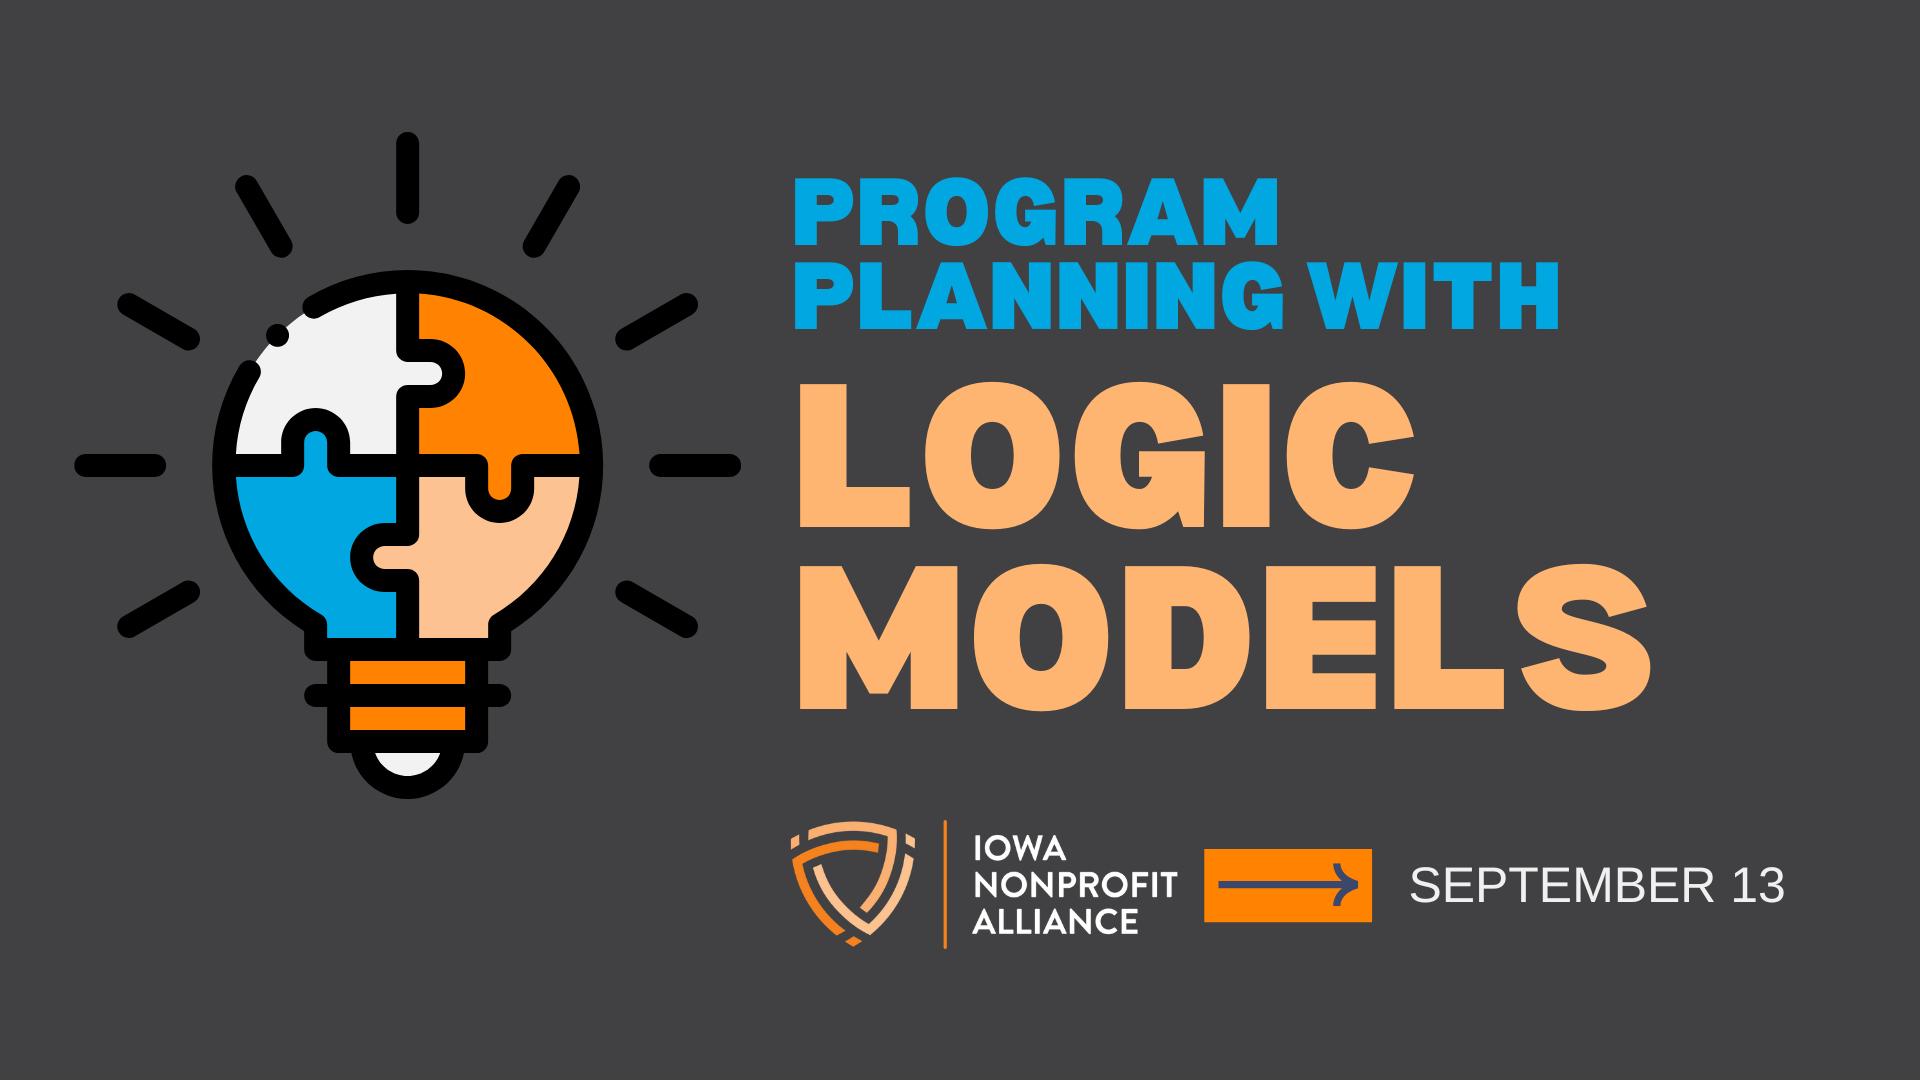 Banner with an illuminated lightbulb made up of four multi-colored puzzle pieces next to the text Program Planning with Logic Models, Iowa Nonprofit Association logo and the date of the event, September 13